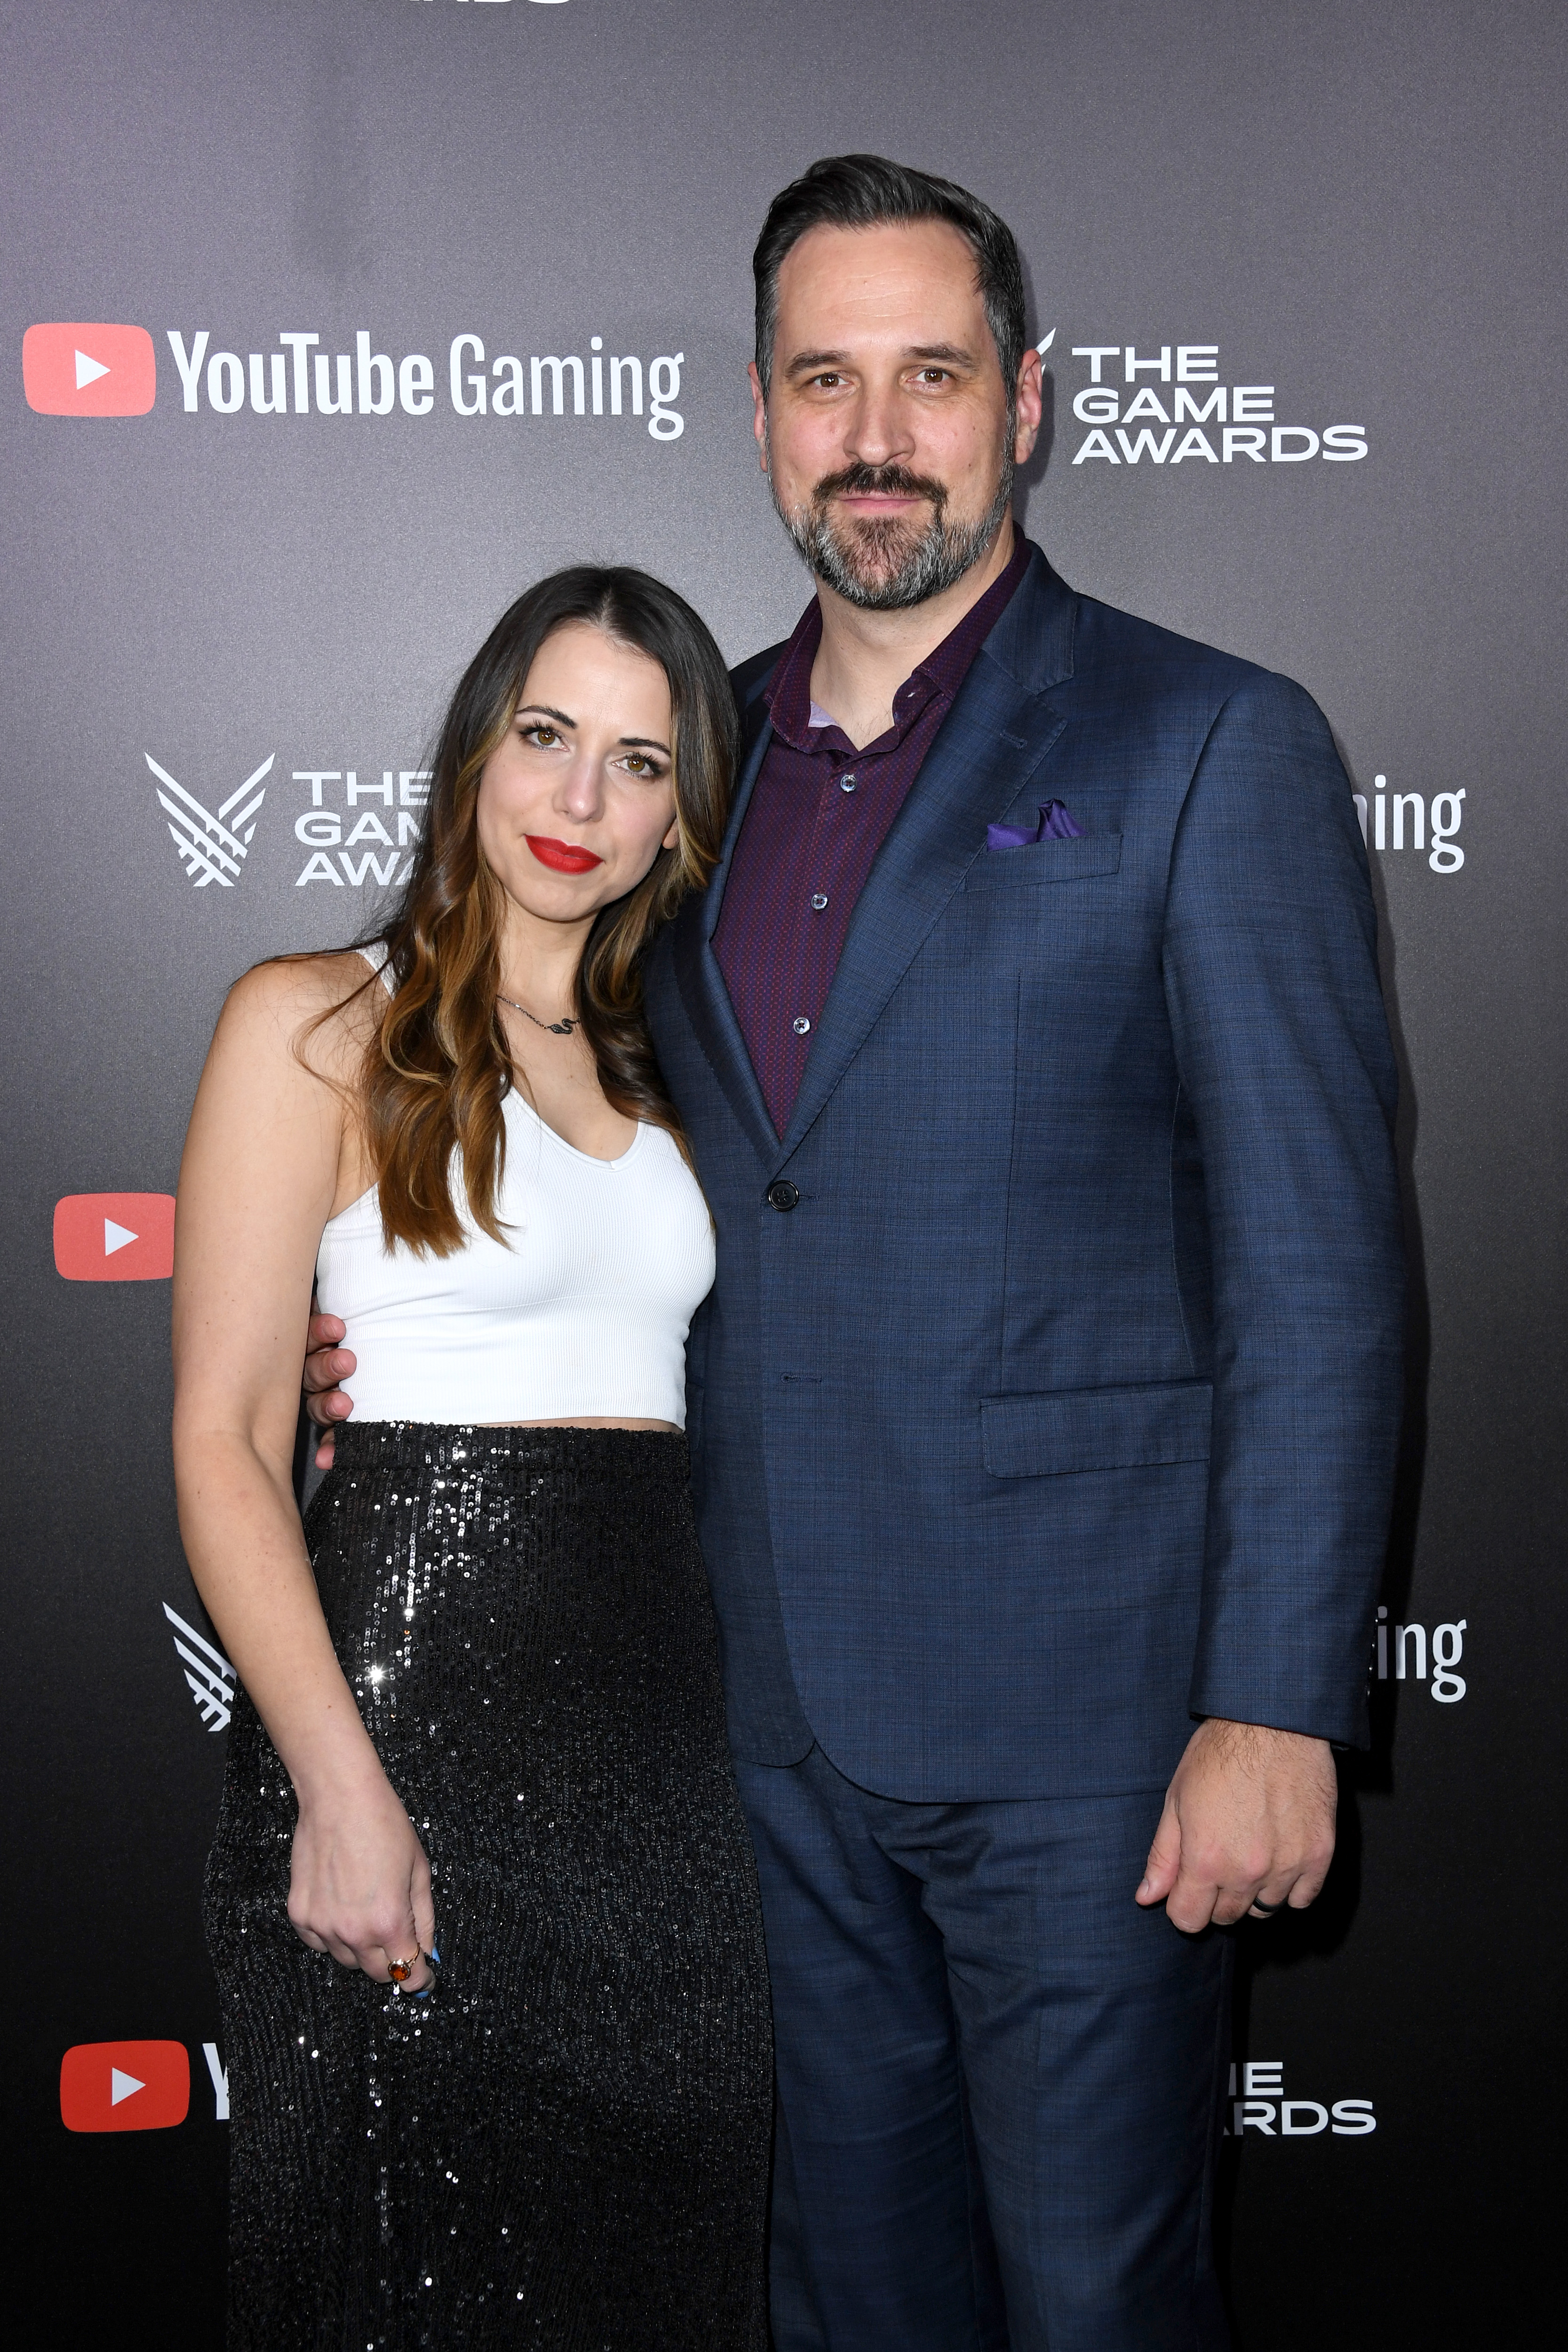 Laura Bailey and Travis Willingham attend The Game Awards 2021 at Microsoft Theater on December 9, 2021, in Los Angeles, California. | Source: Getty Images